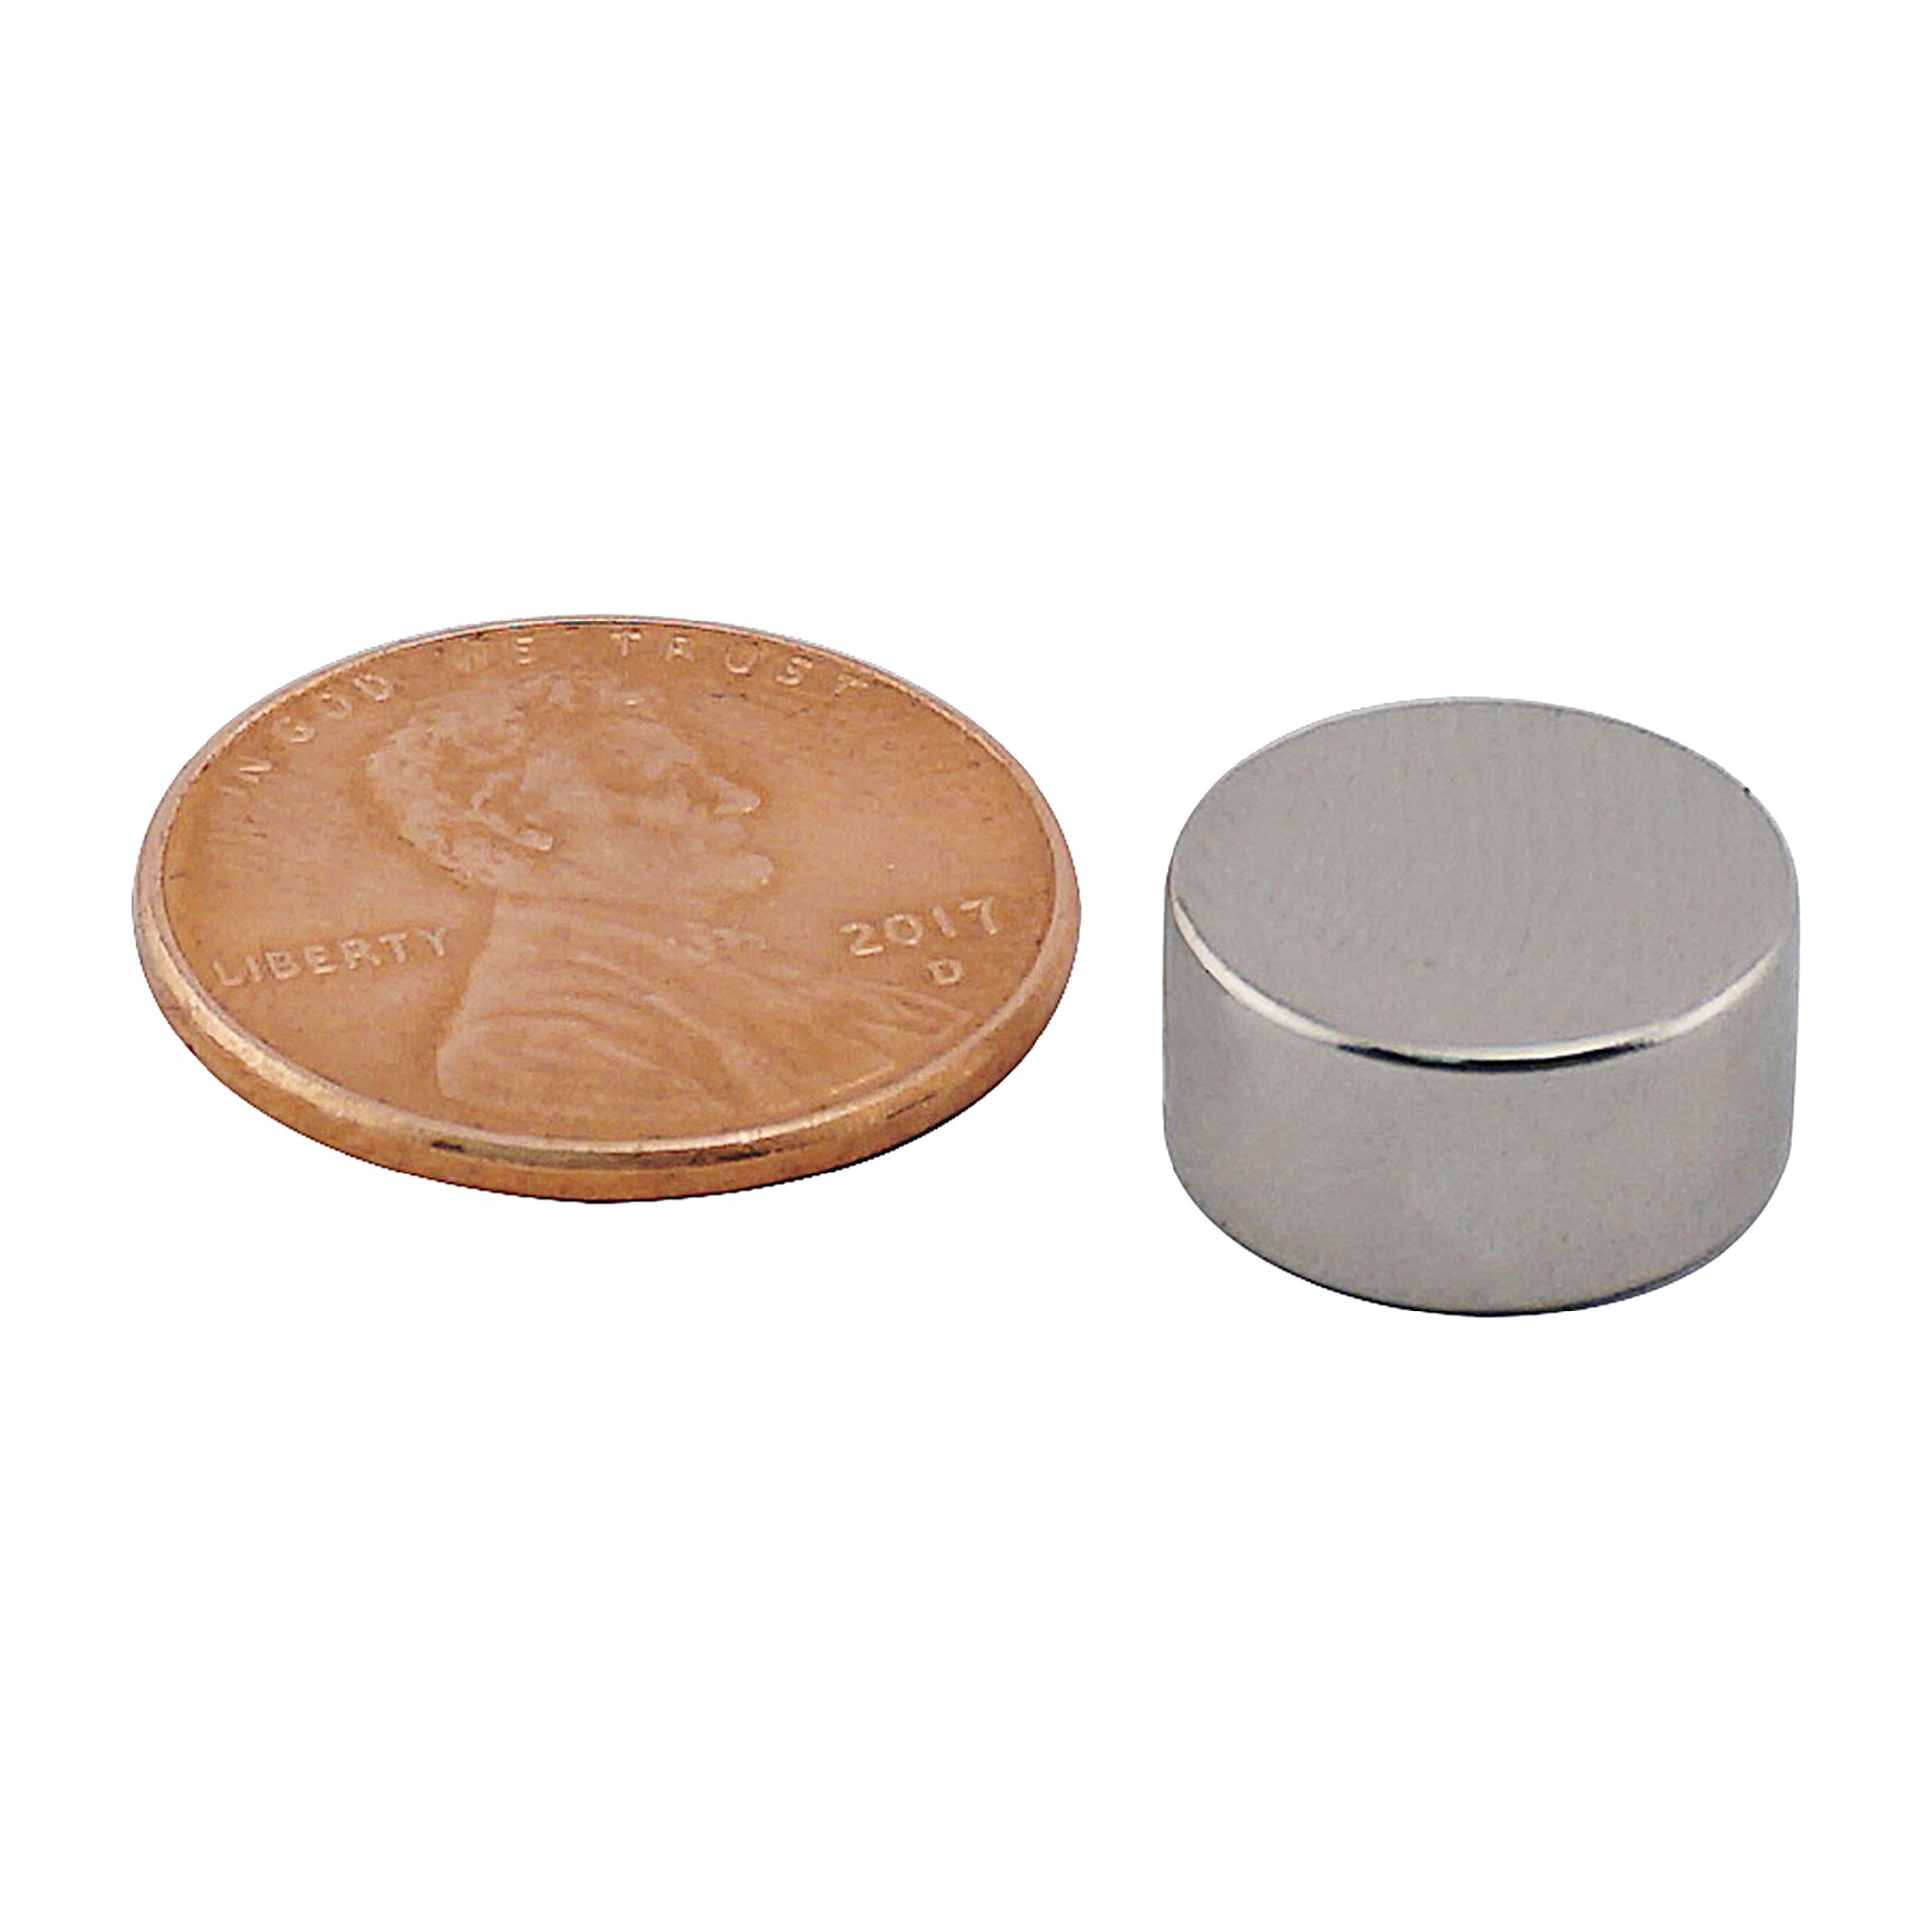 Load image into Gallery viewer, ND45-5025N Neodymium Disc Magnet - Compared to Penny for Size Reference